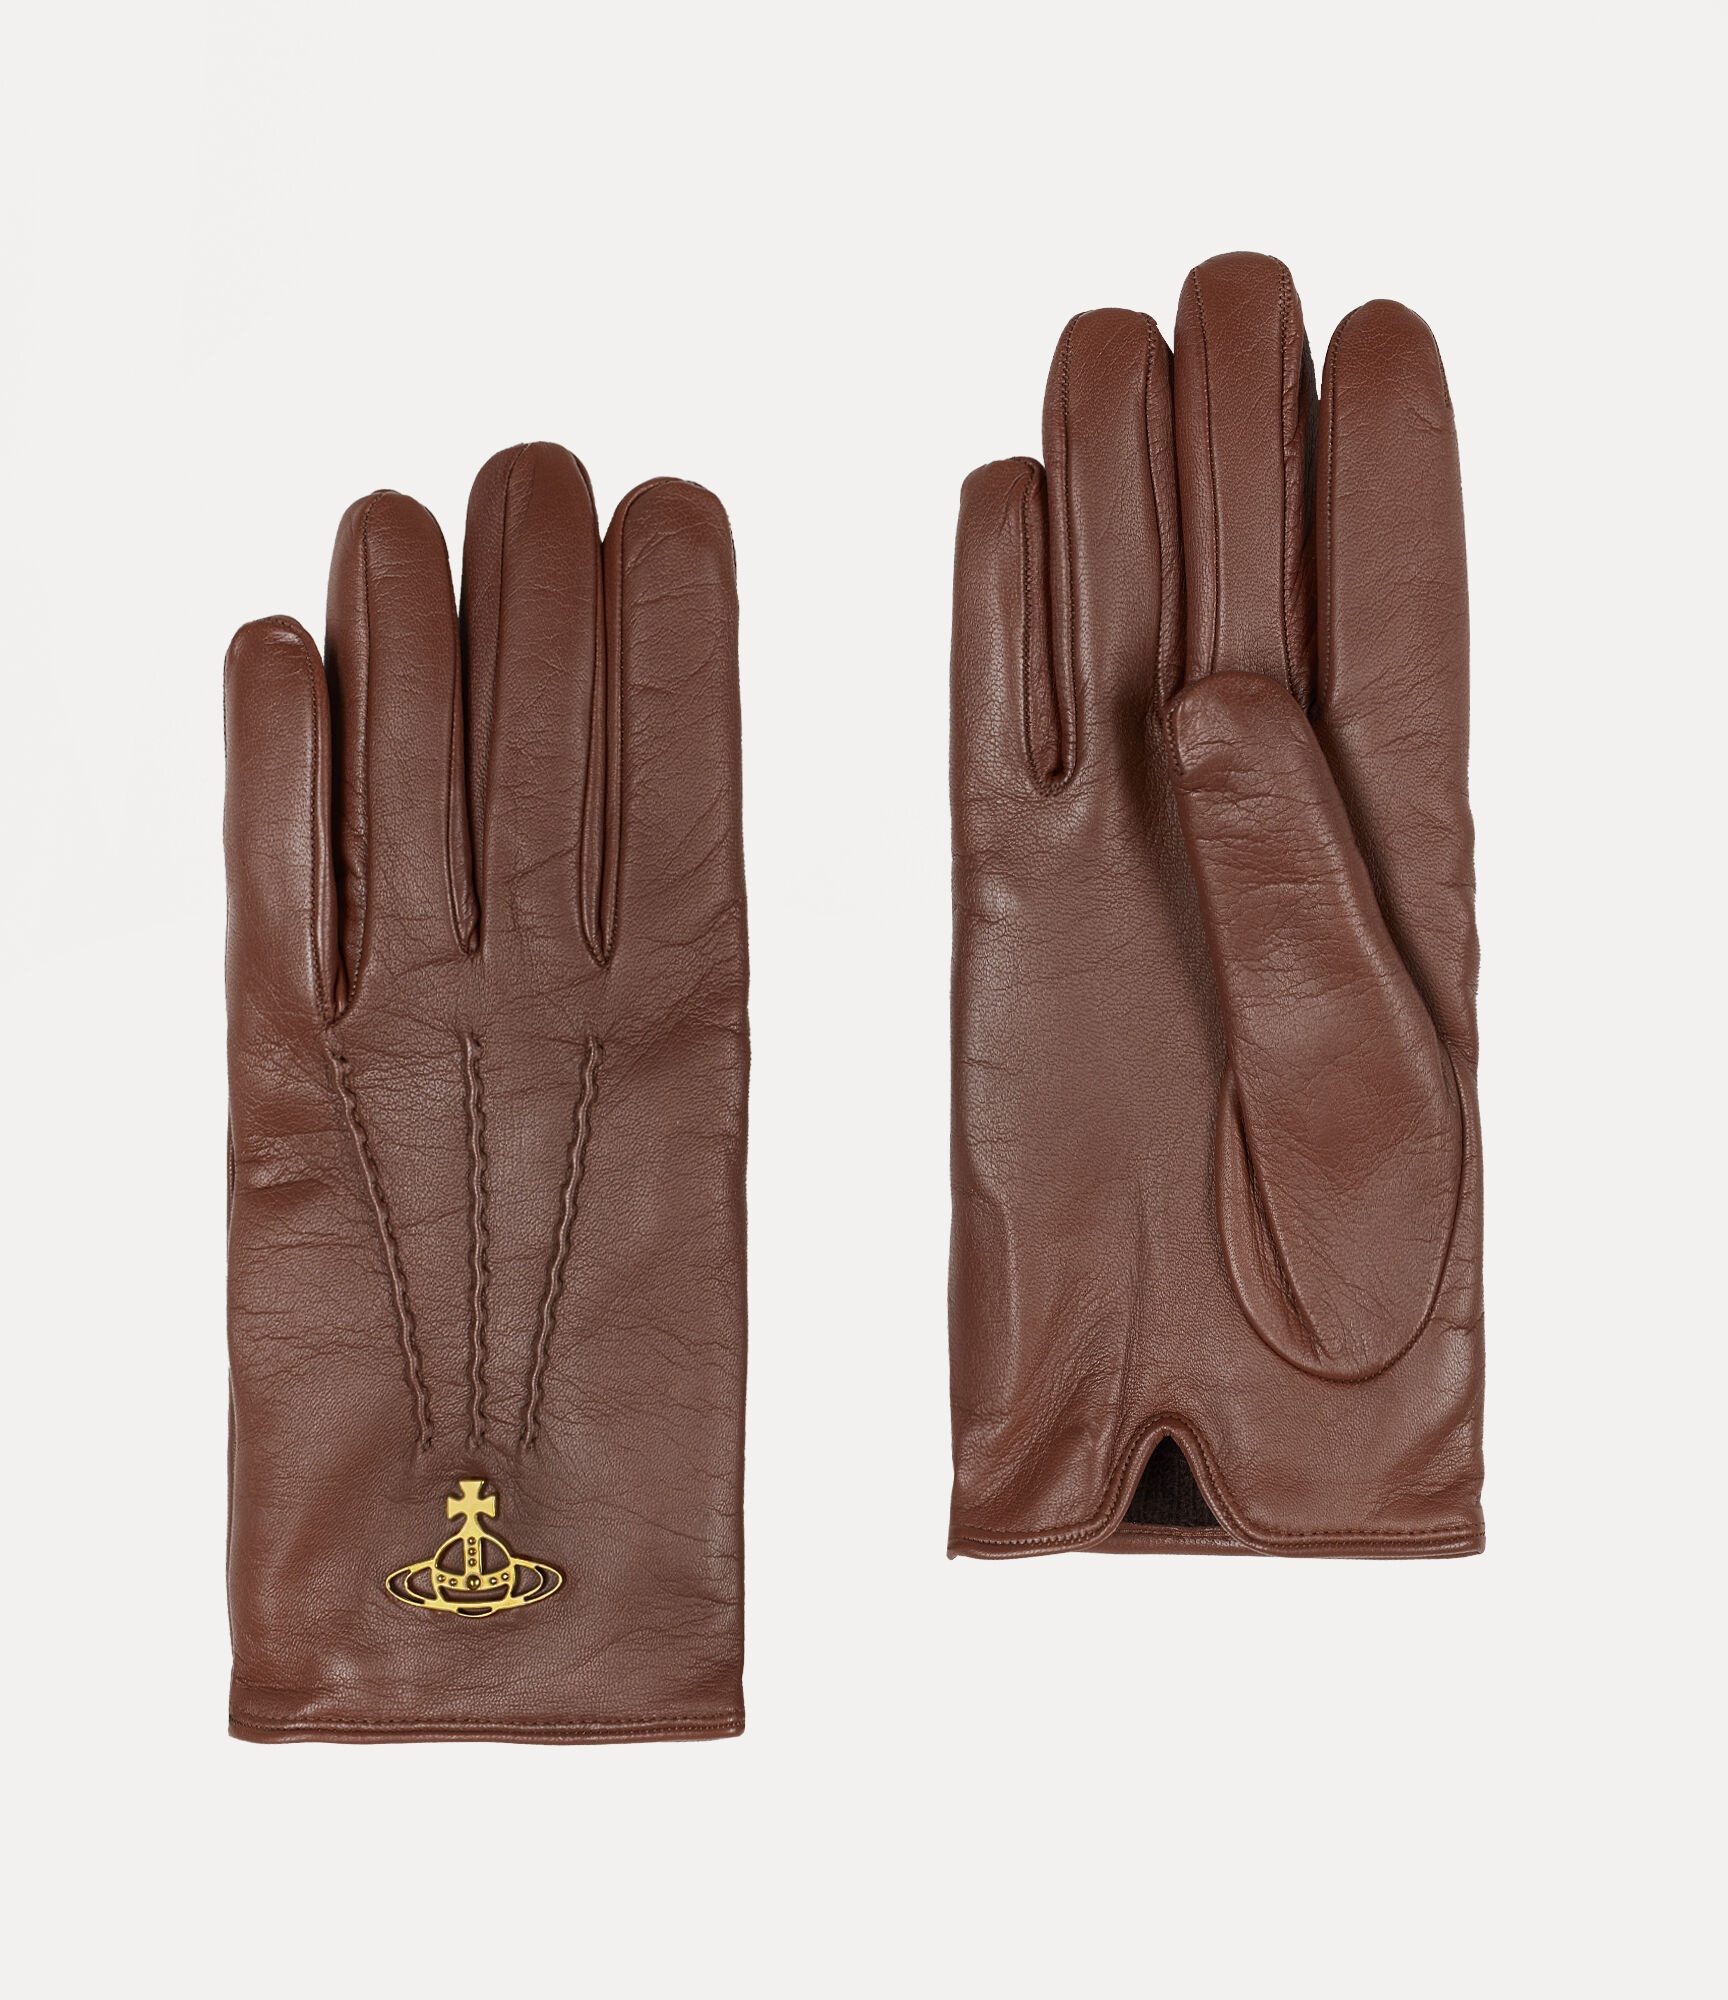 ORB CLASSIC GLOVES - 2